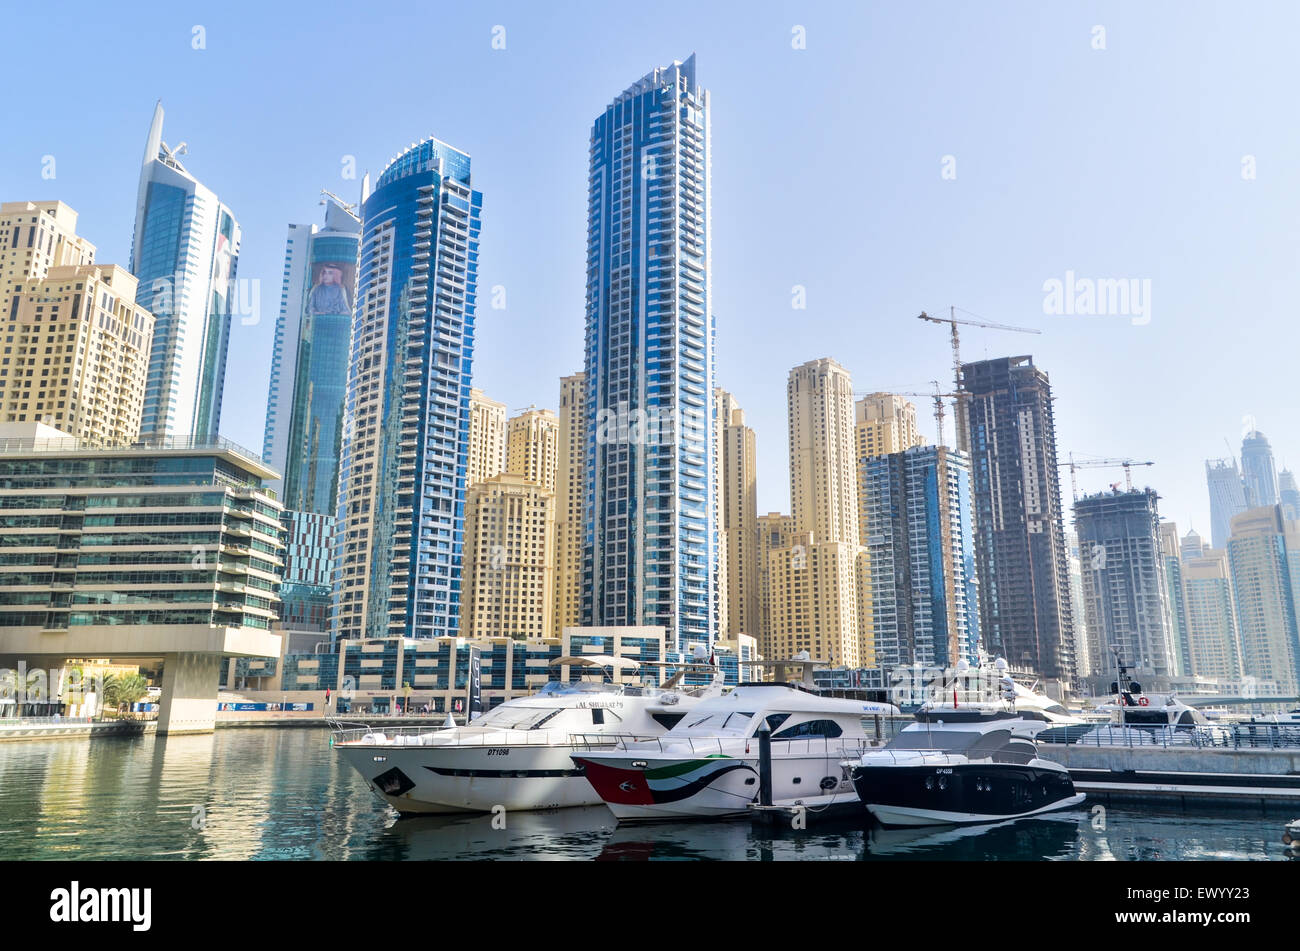 Luxury yachts and futuristic and modern high rise buildings, towers and hotels of the Dubai Marina, United Arab Emirates Stock Photo